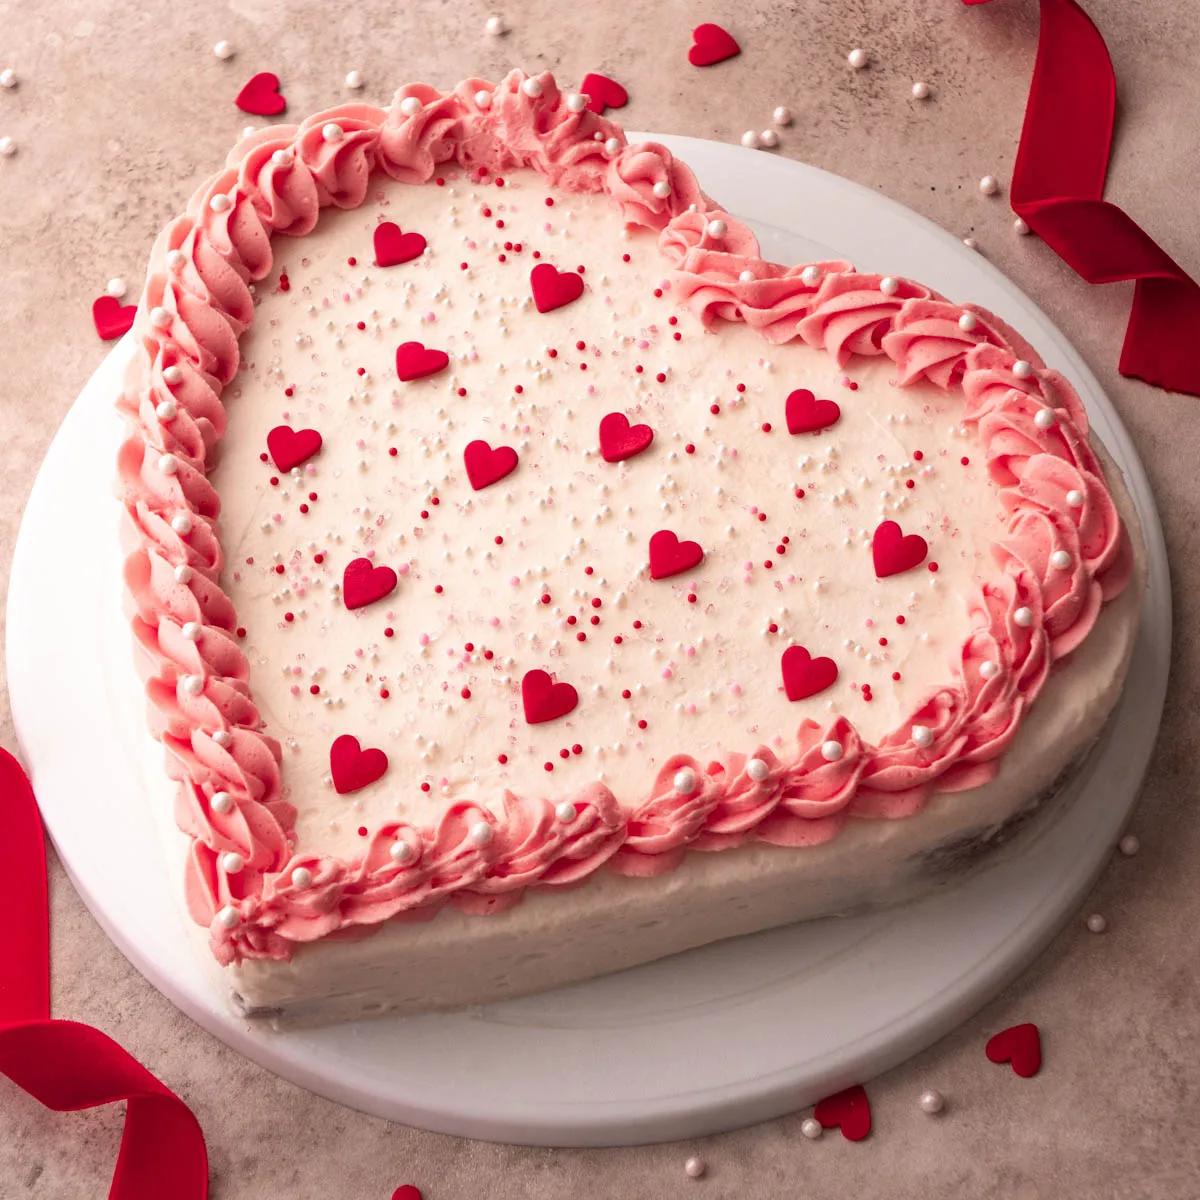 Heart-shaped Cake Images: An Incredible Collection of Over 999 Stunning ...